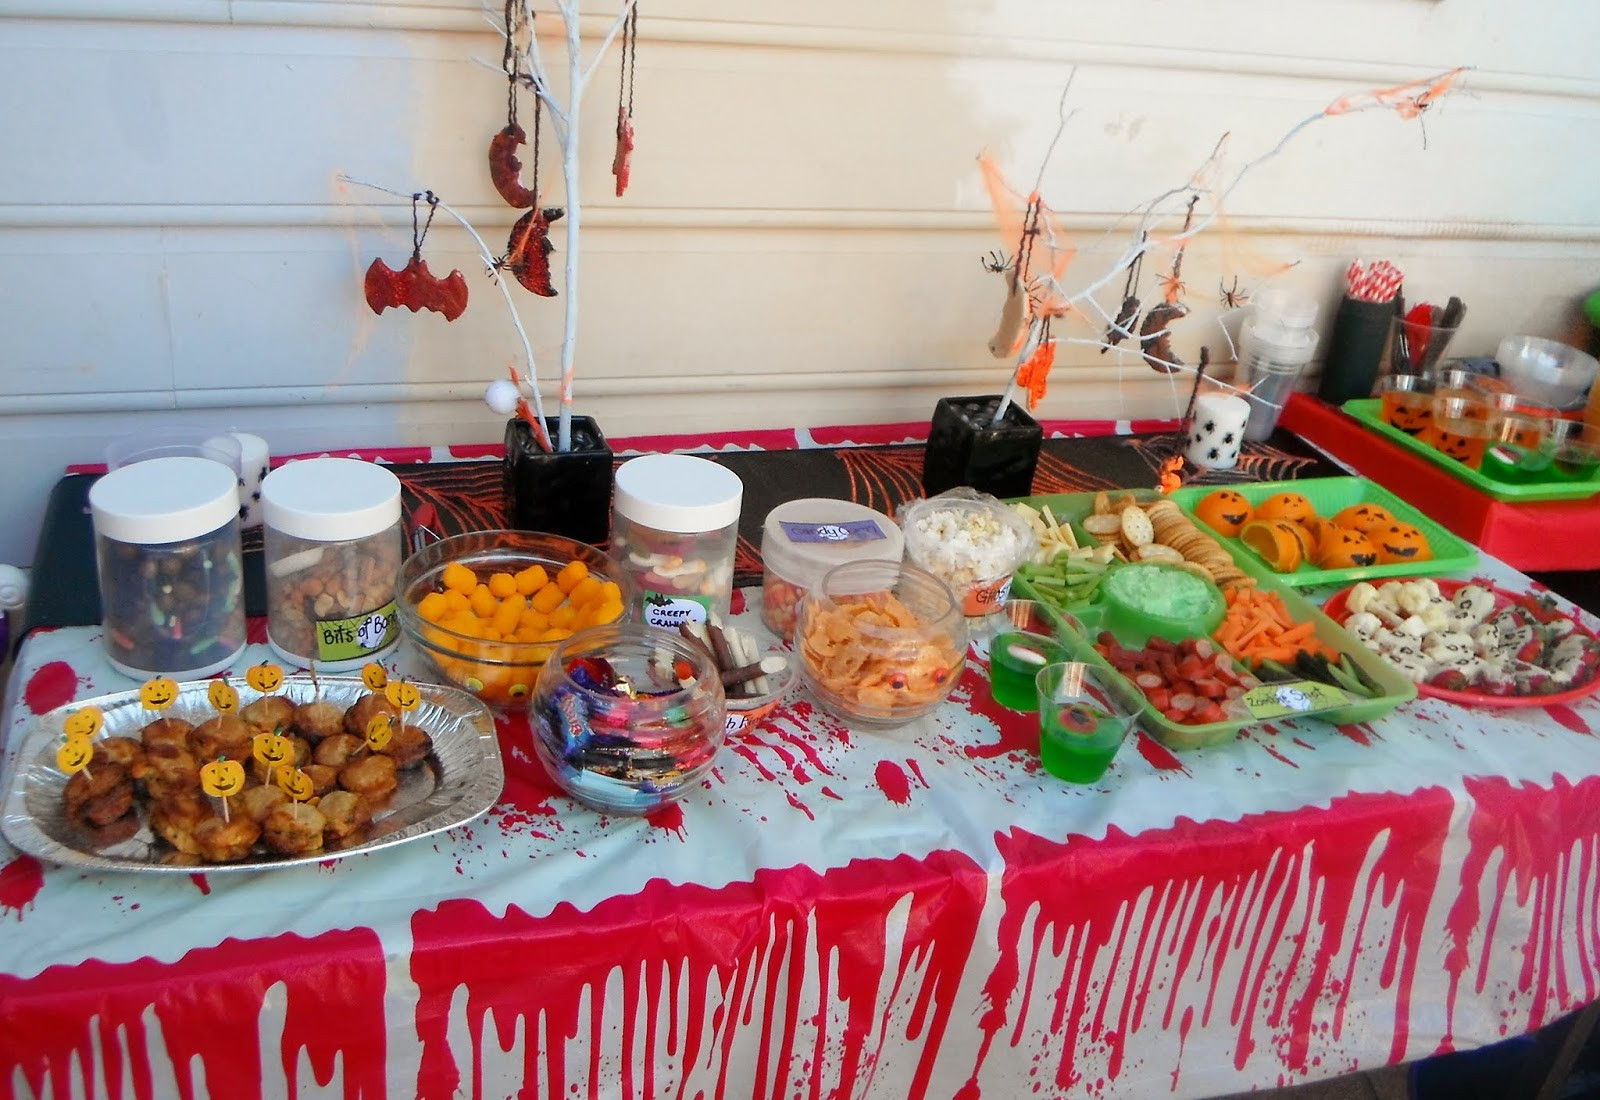 Halloween Party For Kids
 Adventures at home with Mum Halloween Party Food